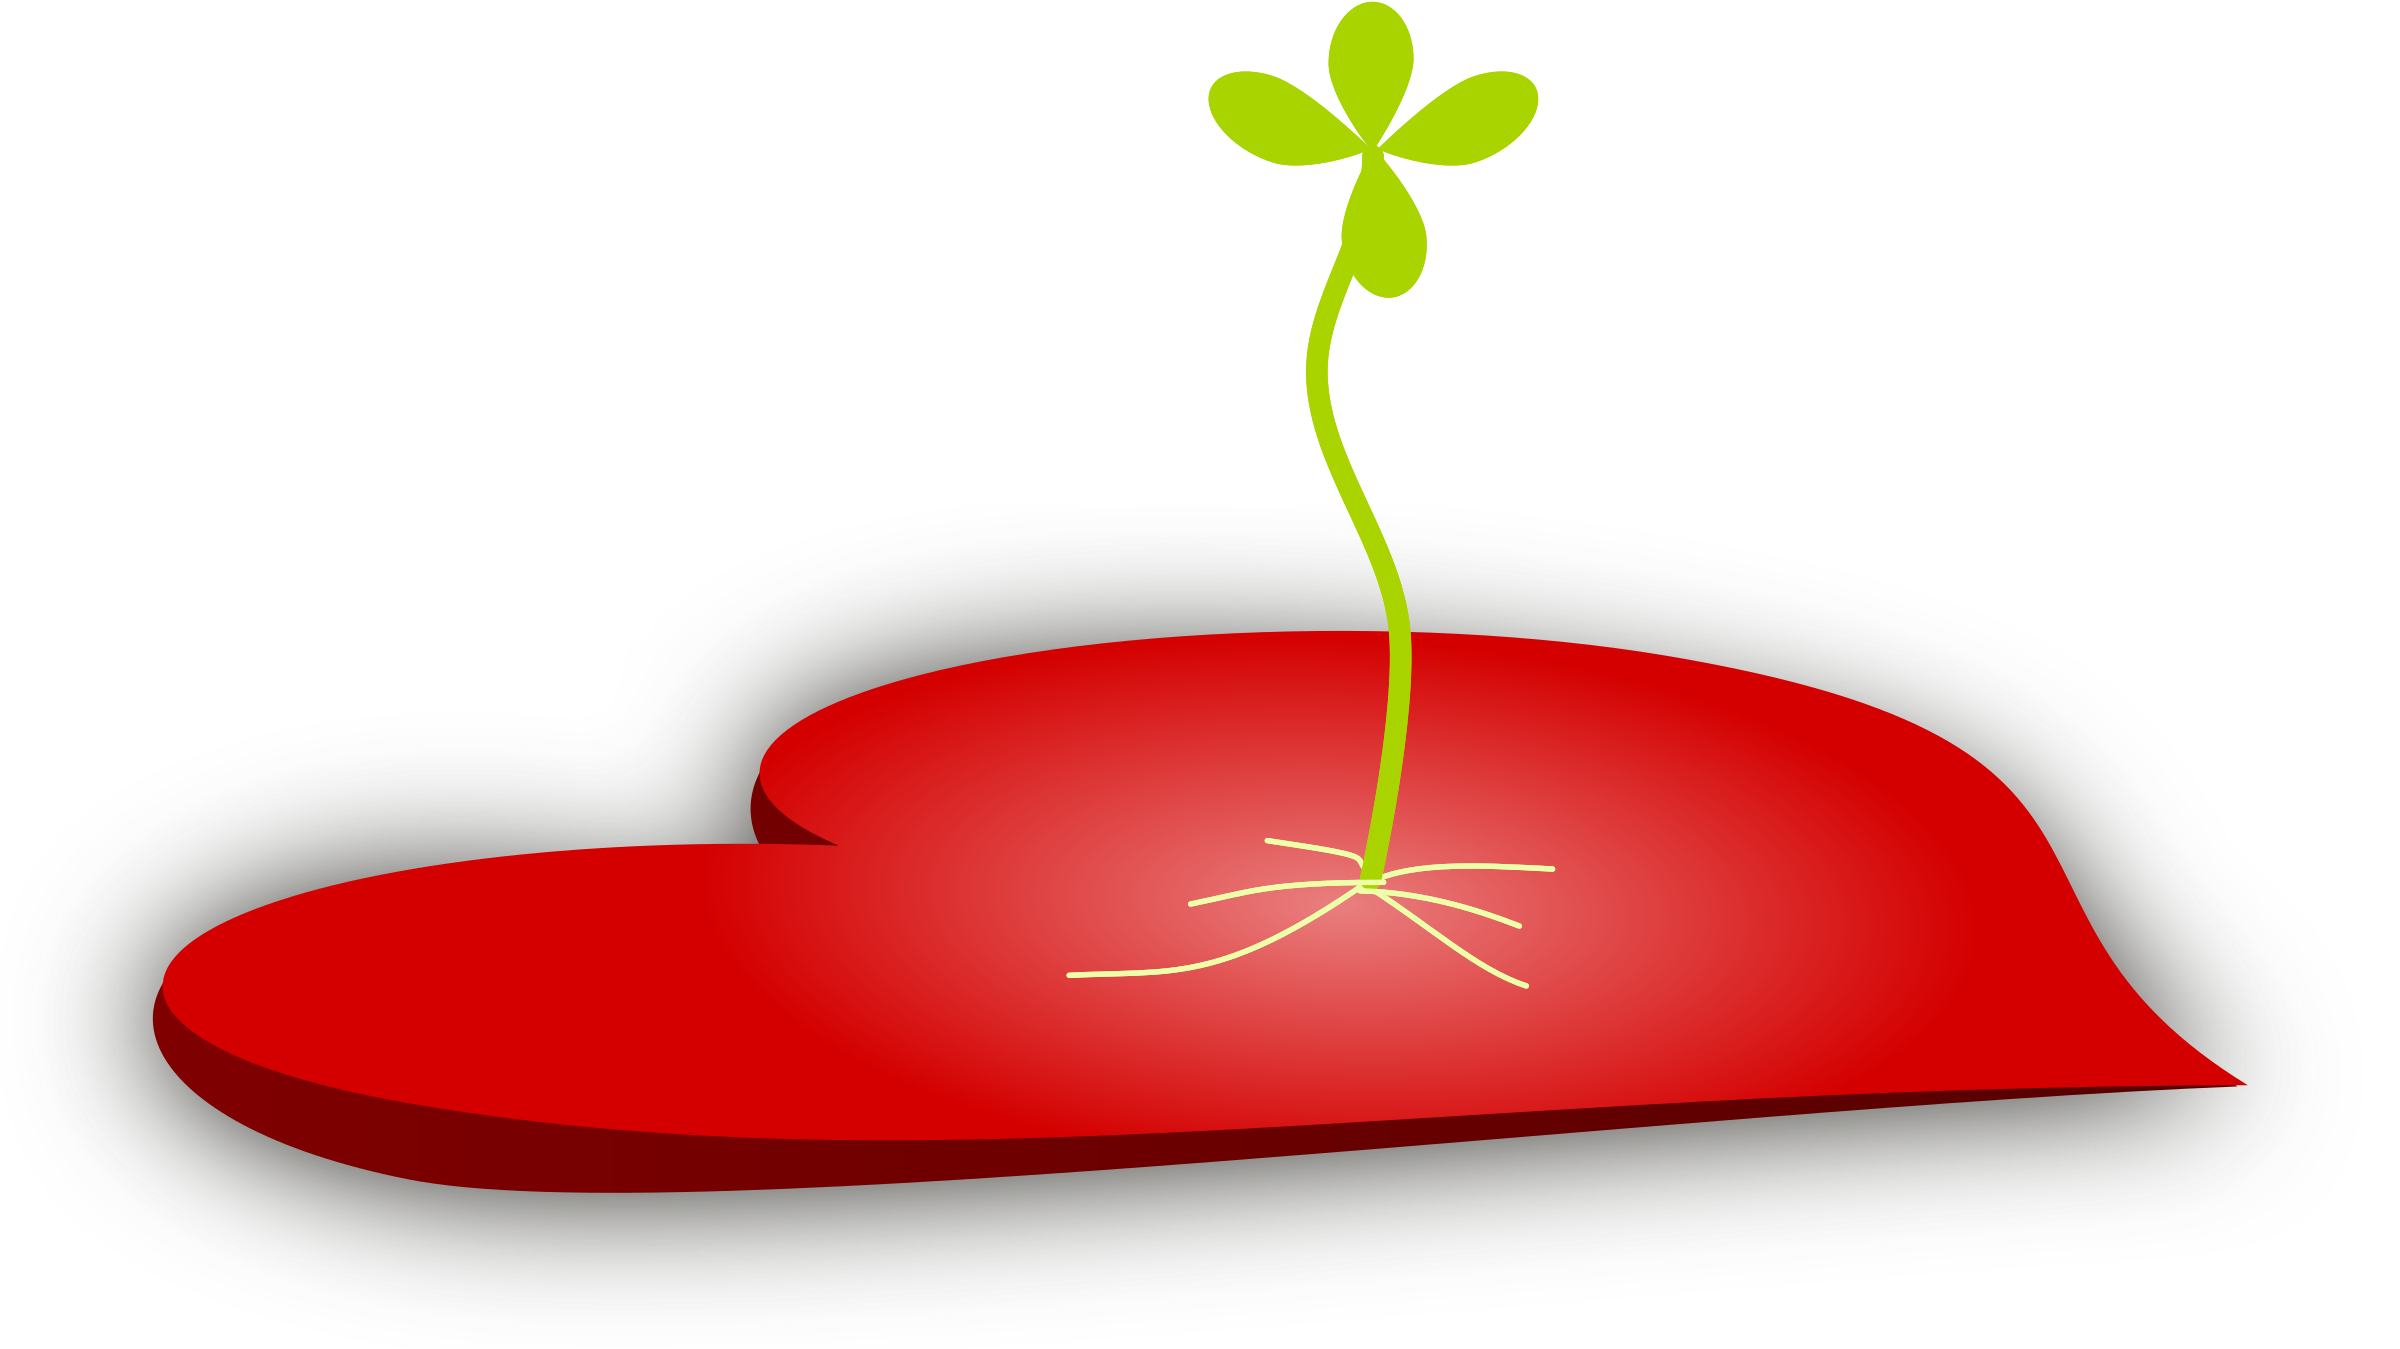 seedling clipart leafy plant